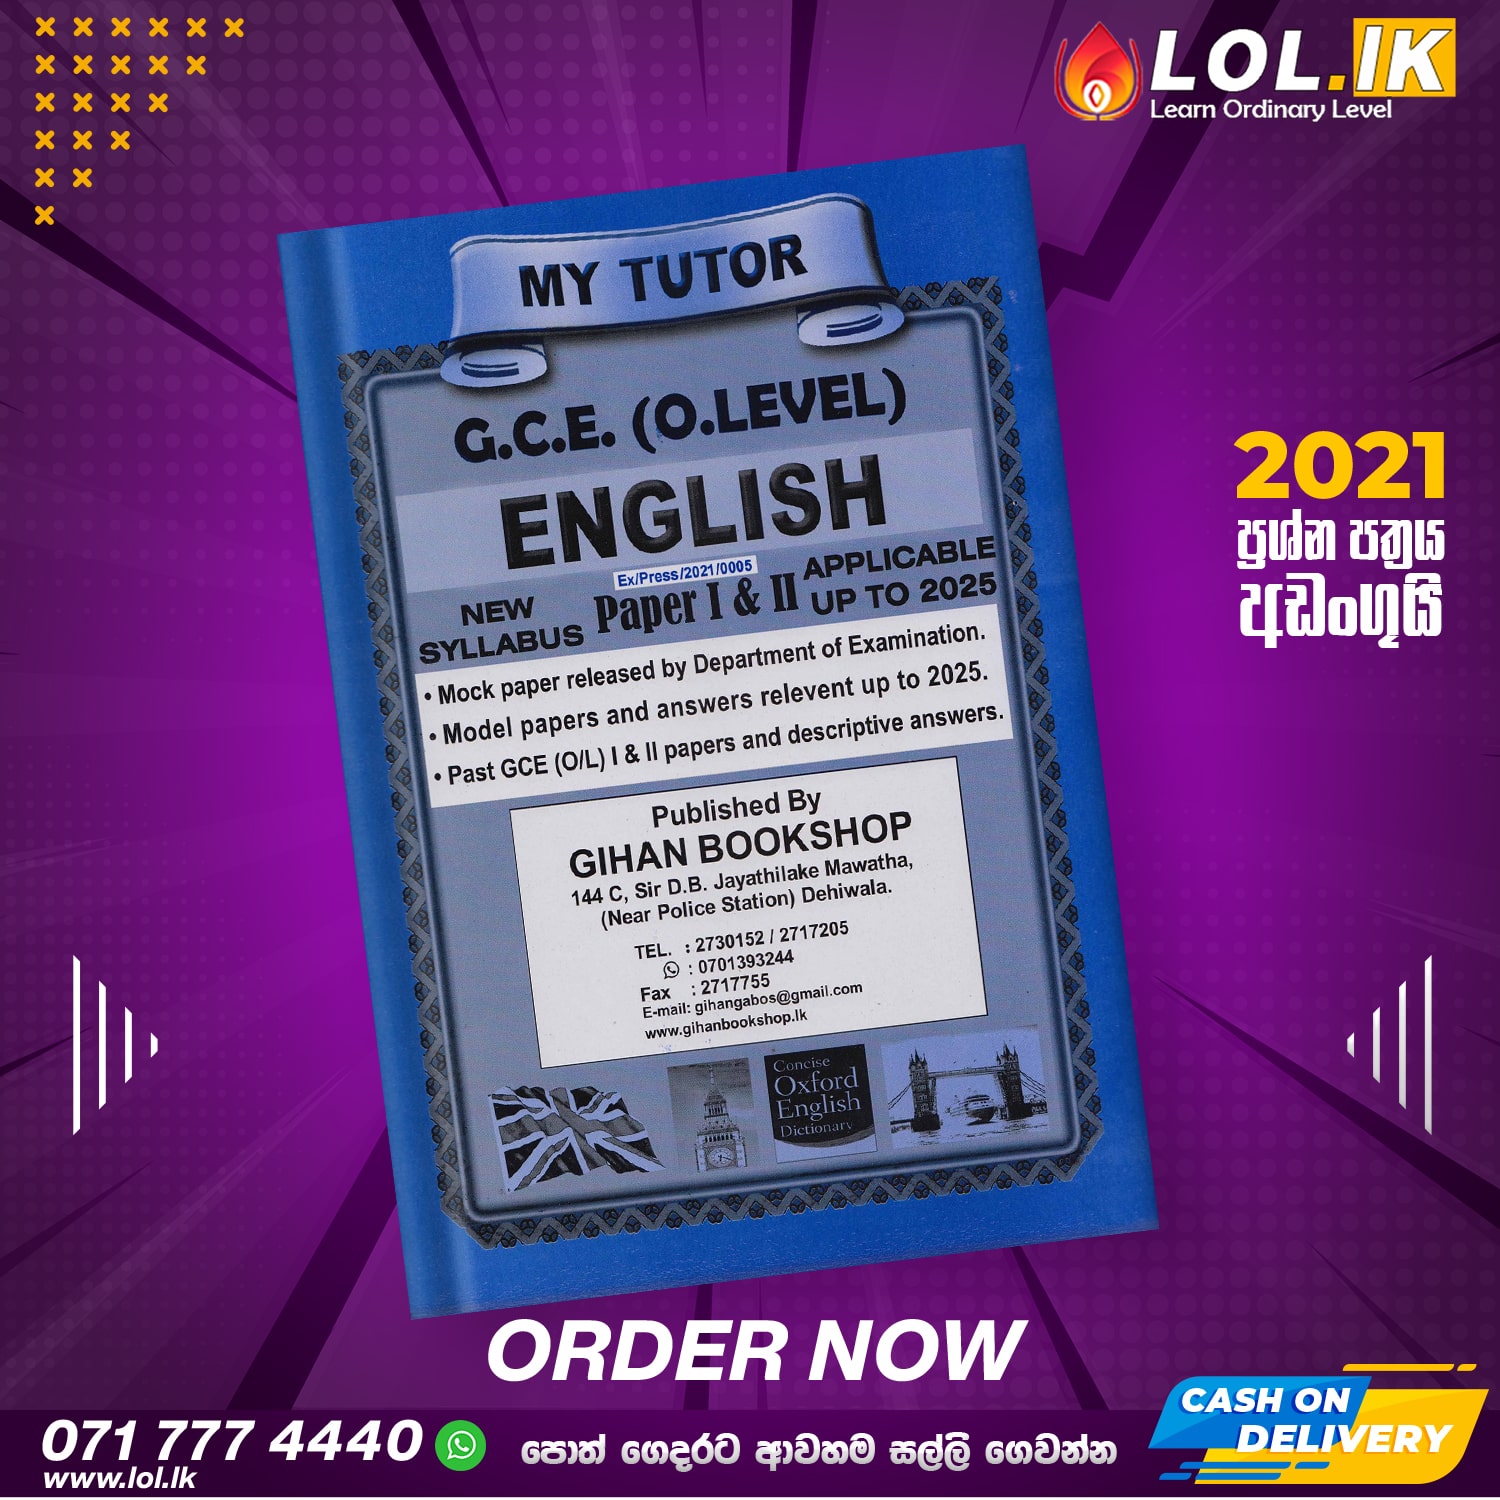 Buy gce ol english past papers book, Buy o/l english past paper book, English Medium o/l english online, English Medium o/l past papers english book, o/l english past papers book online order,